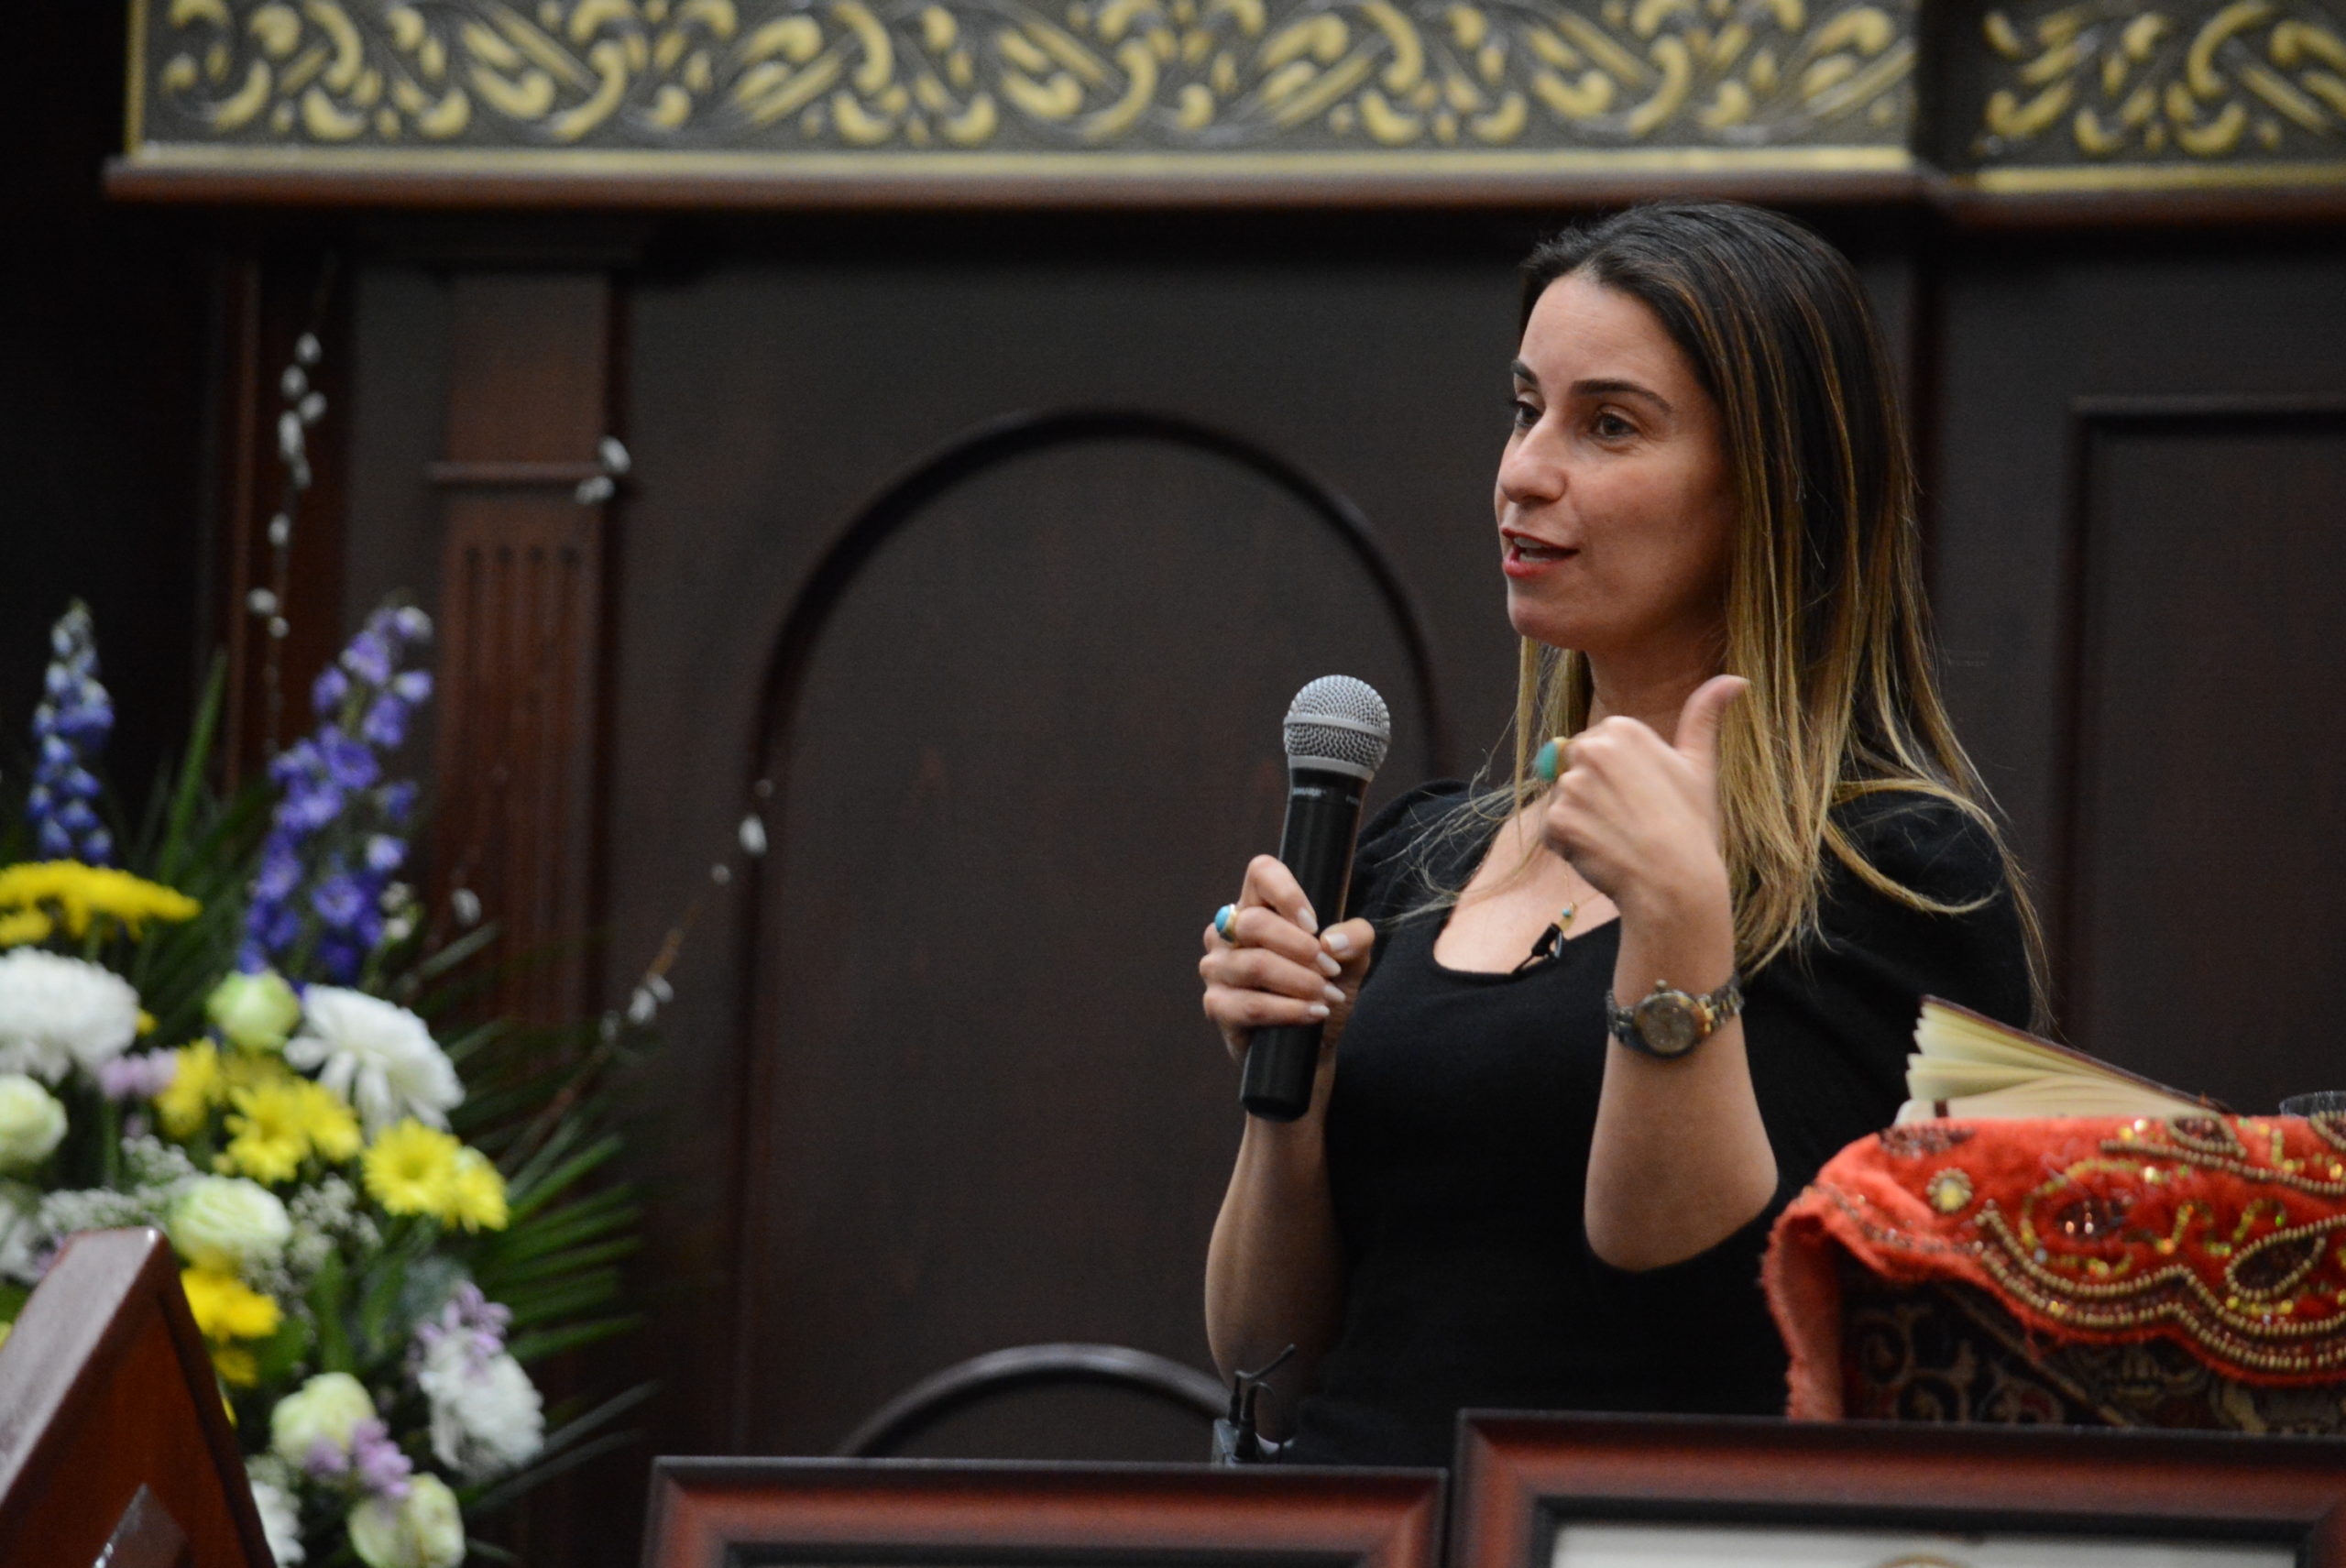 Saba Soomekh offered insights on the past, present and future of the Persian Jewish community on Monday night. (Photo by Janelle Clausen)